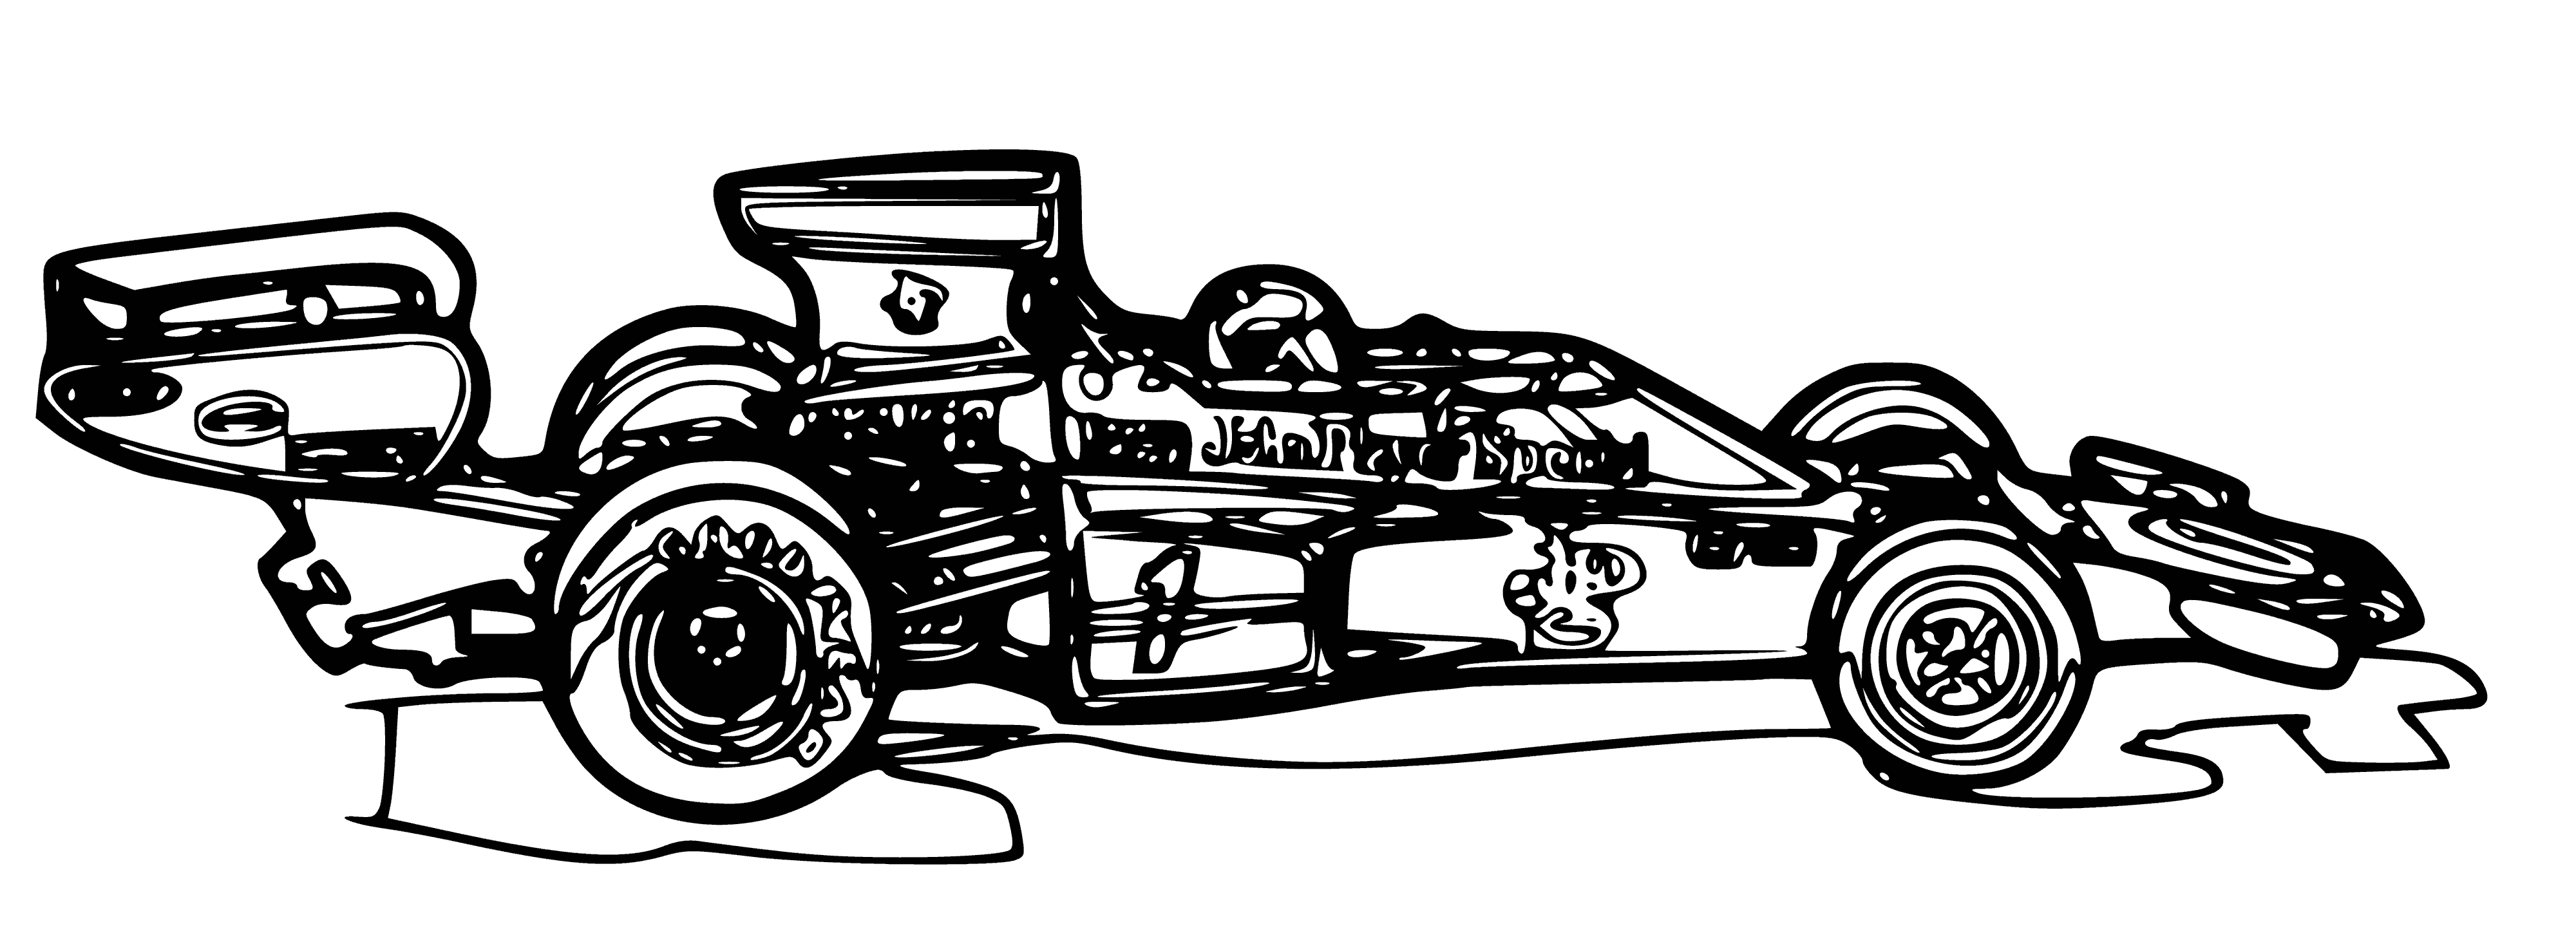 coloring page: A black and white car with a "6" races, followed closely by a blue car, on a track. #racing